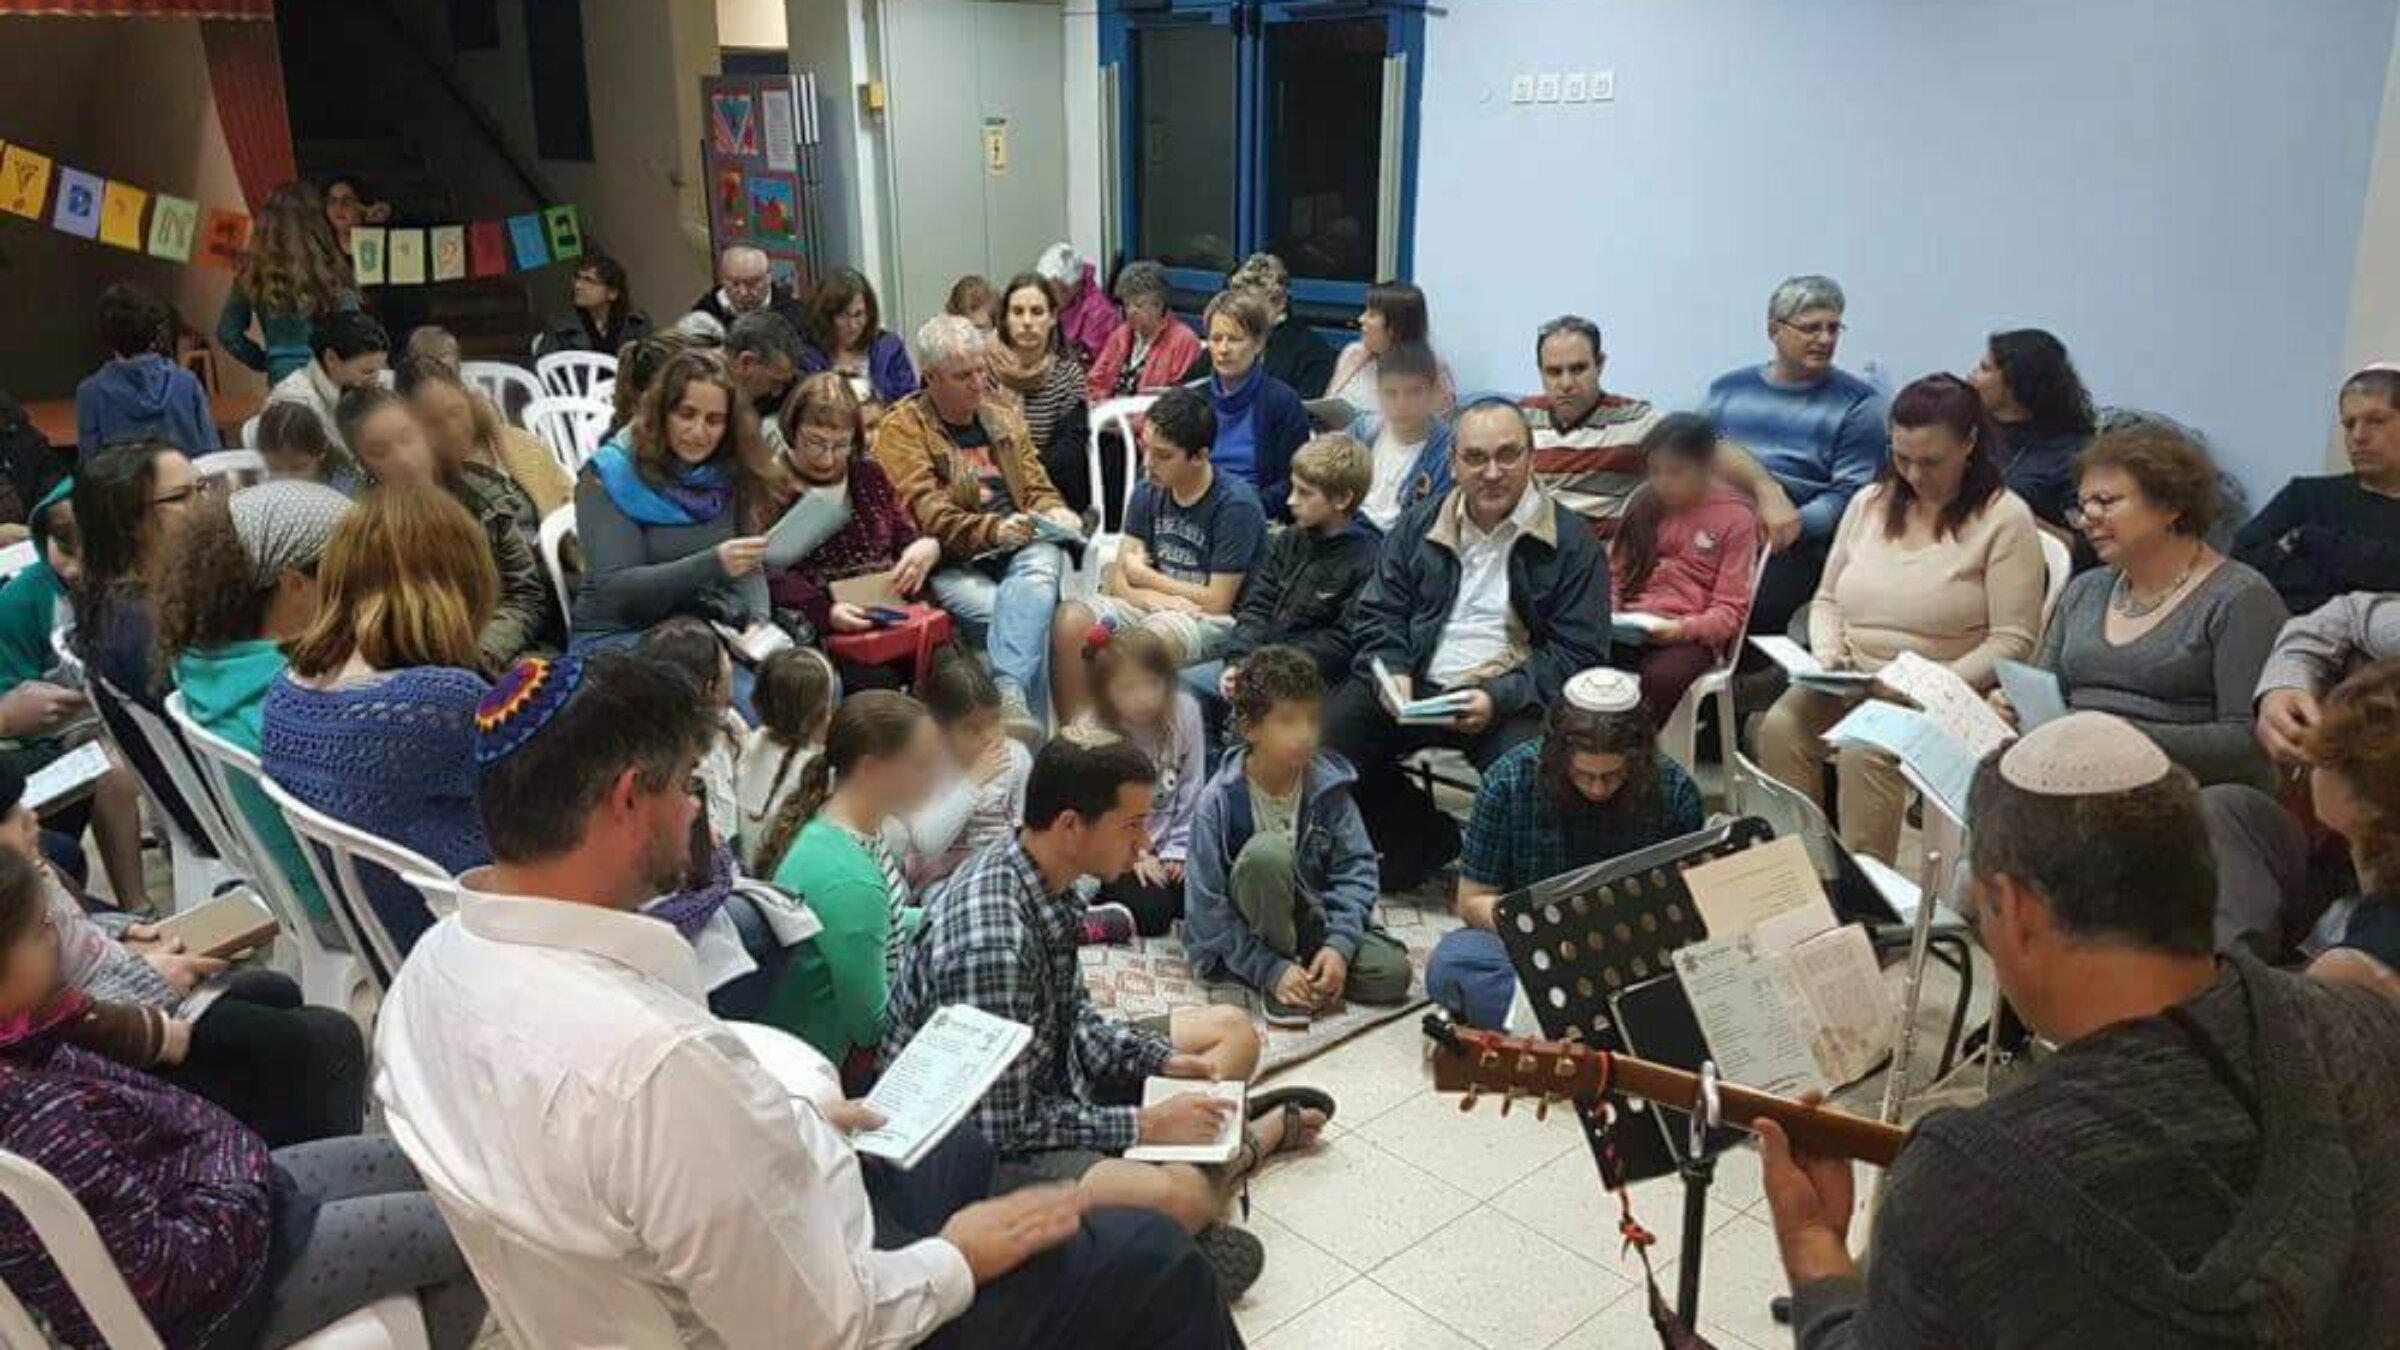 The Yuval congregation prays together inside a cramped school classroom. 